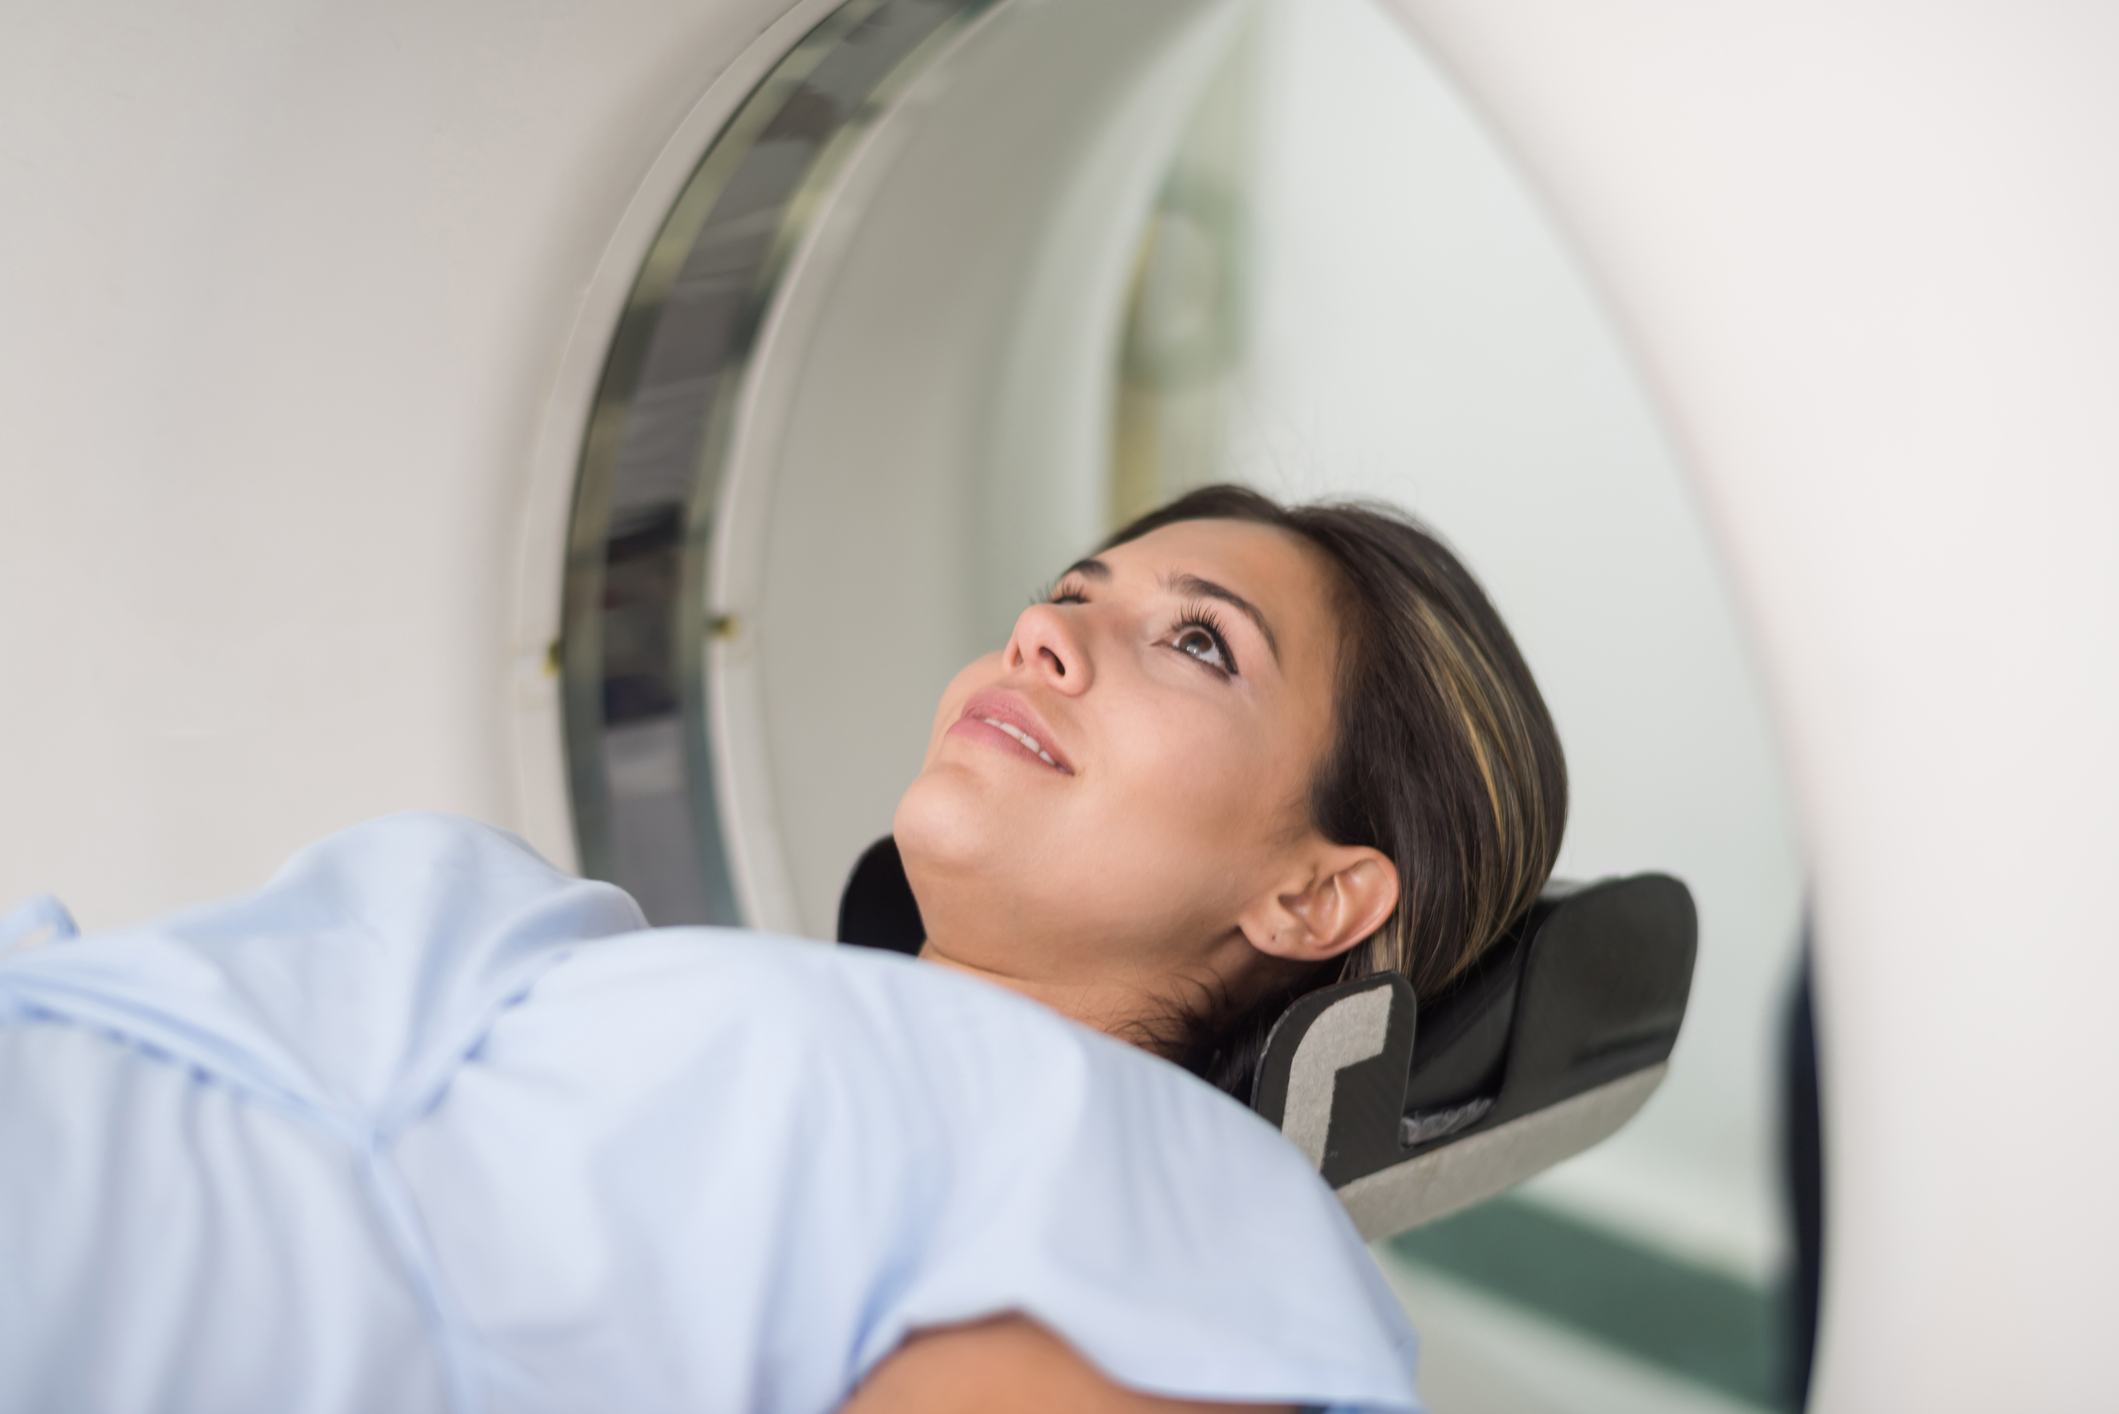 What to Expect During a CT Scan